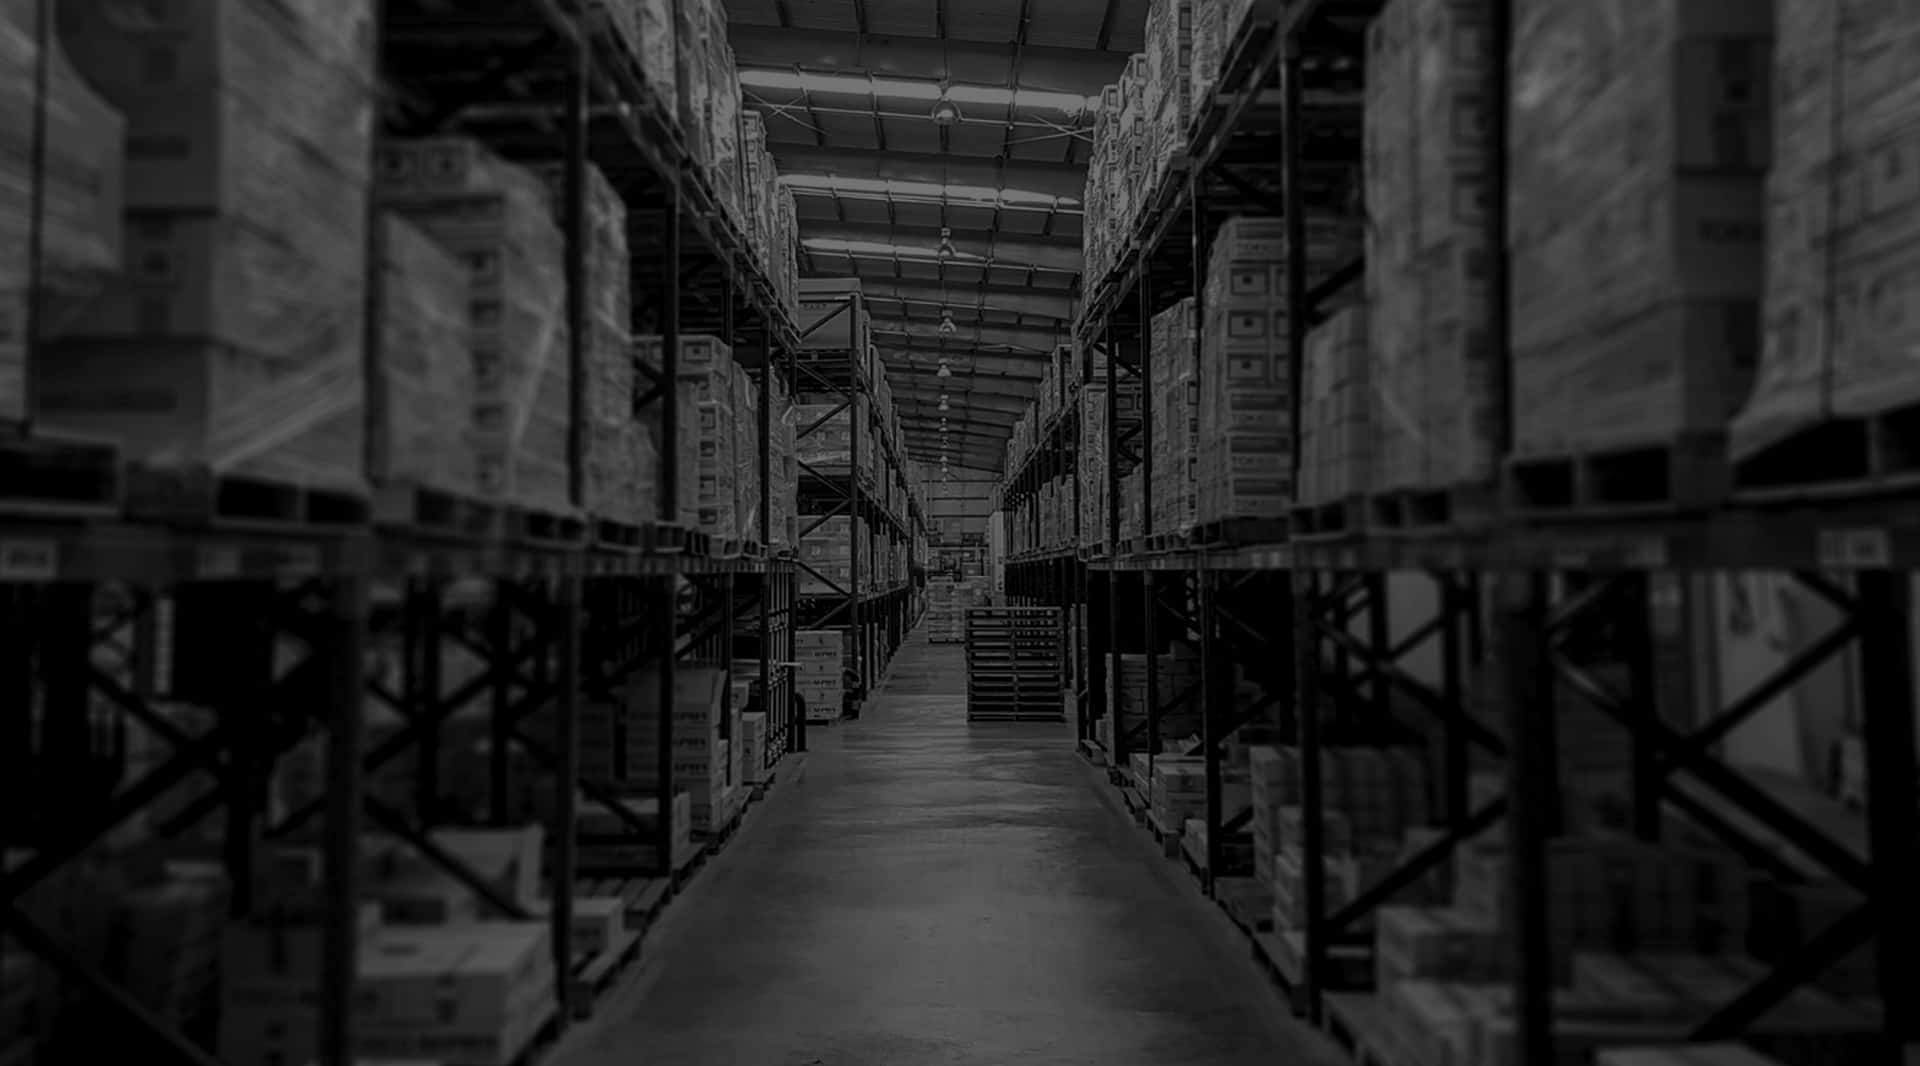 A Warehouse With Many Shelves And Boxes